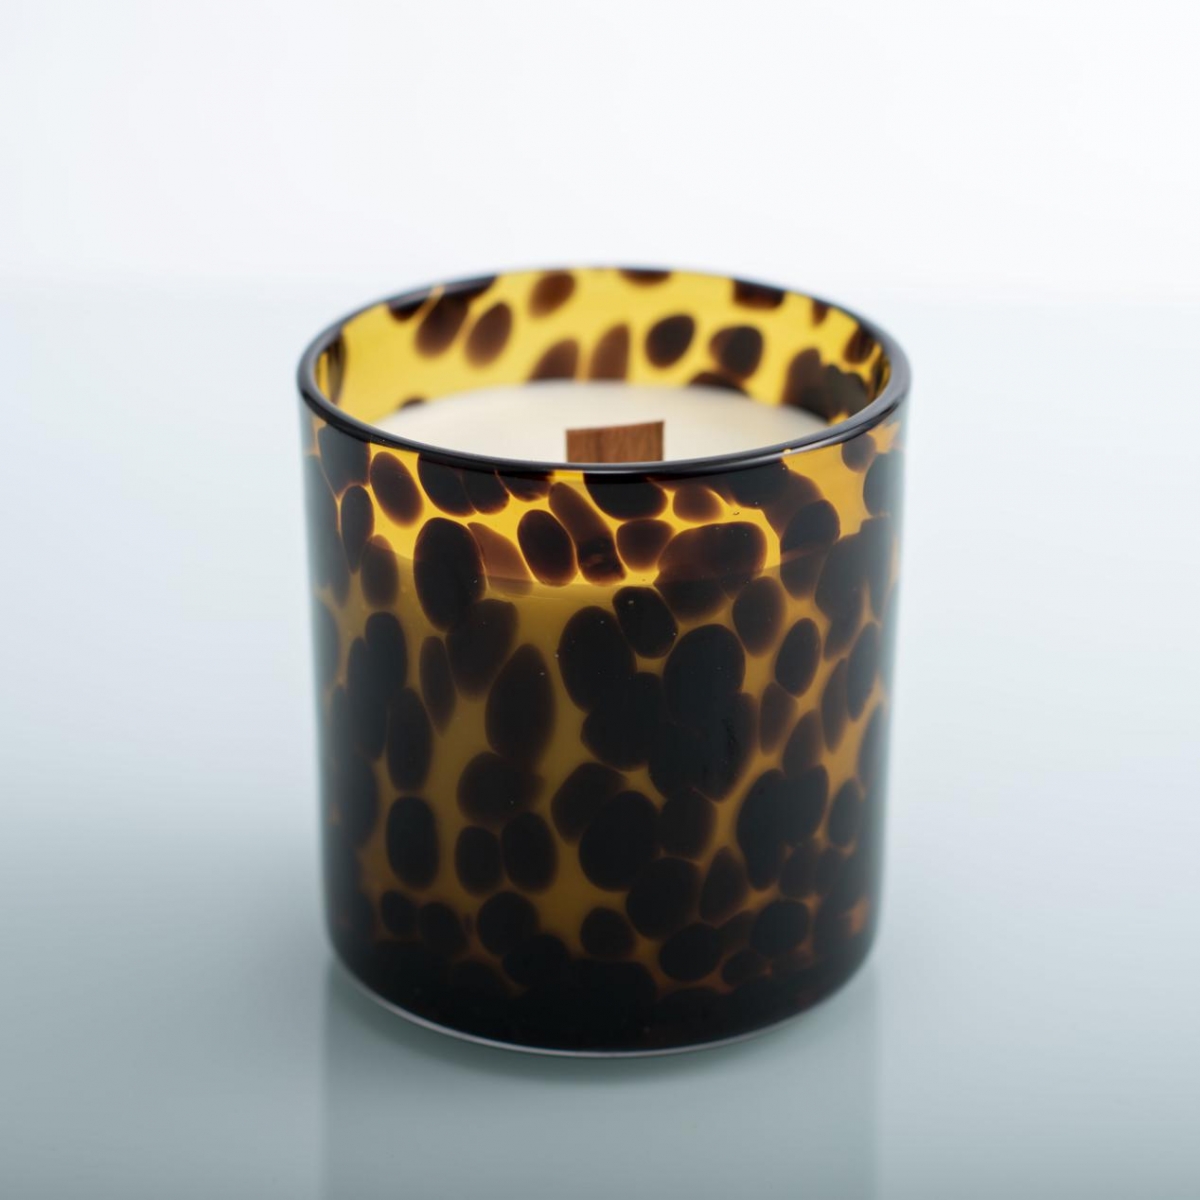 Tortoise Shell Glass Scented Candles ：Tom Ford OUD Wood ,Luxury Perfume Candles , Beeswax Scented Candles ,Glaze Scented Candles ,Wood Wick ,China Factory , Price-HOWCANDLE-Candles,Scented Candles,Aromatherapy Candles,Soy Candles,Vegan Candles,Jar Candles,Pillar Candles,Candle Gift Sets,Essential Oils,Reed Diffuser,Candle Holder,